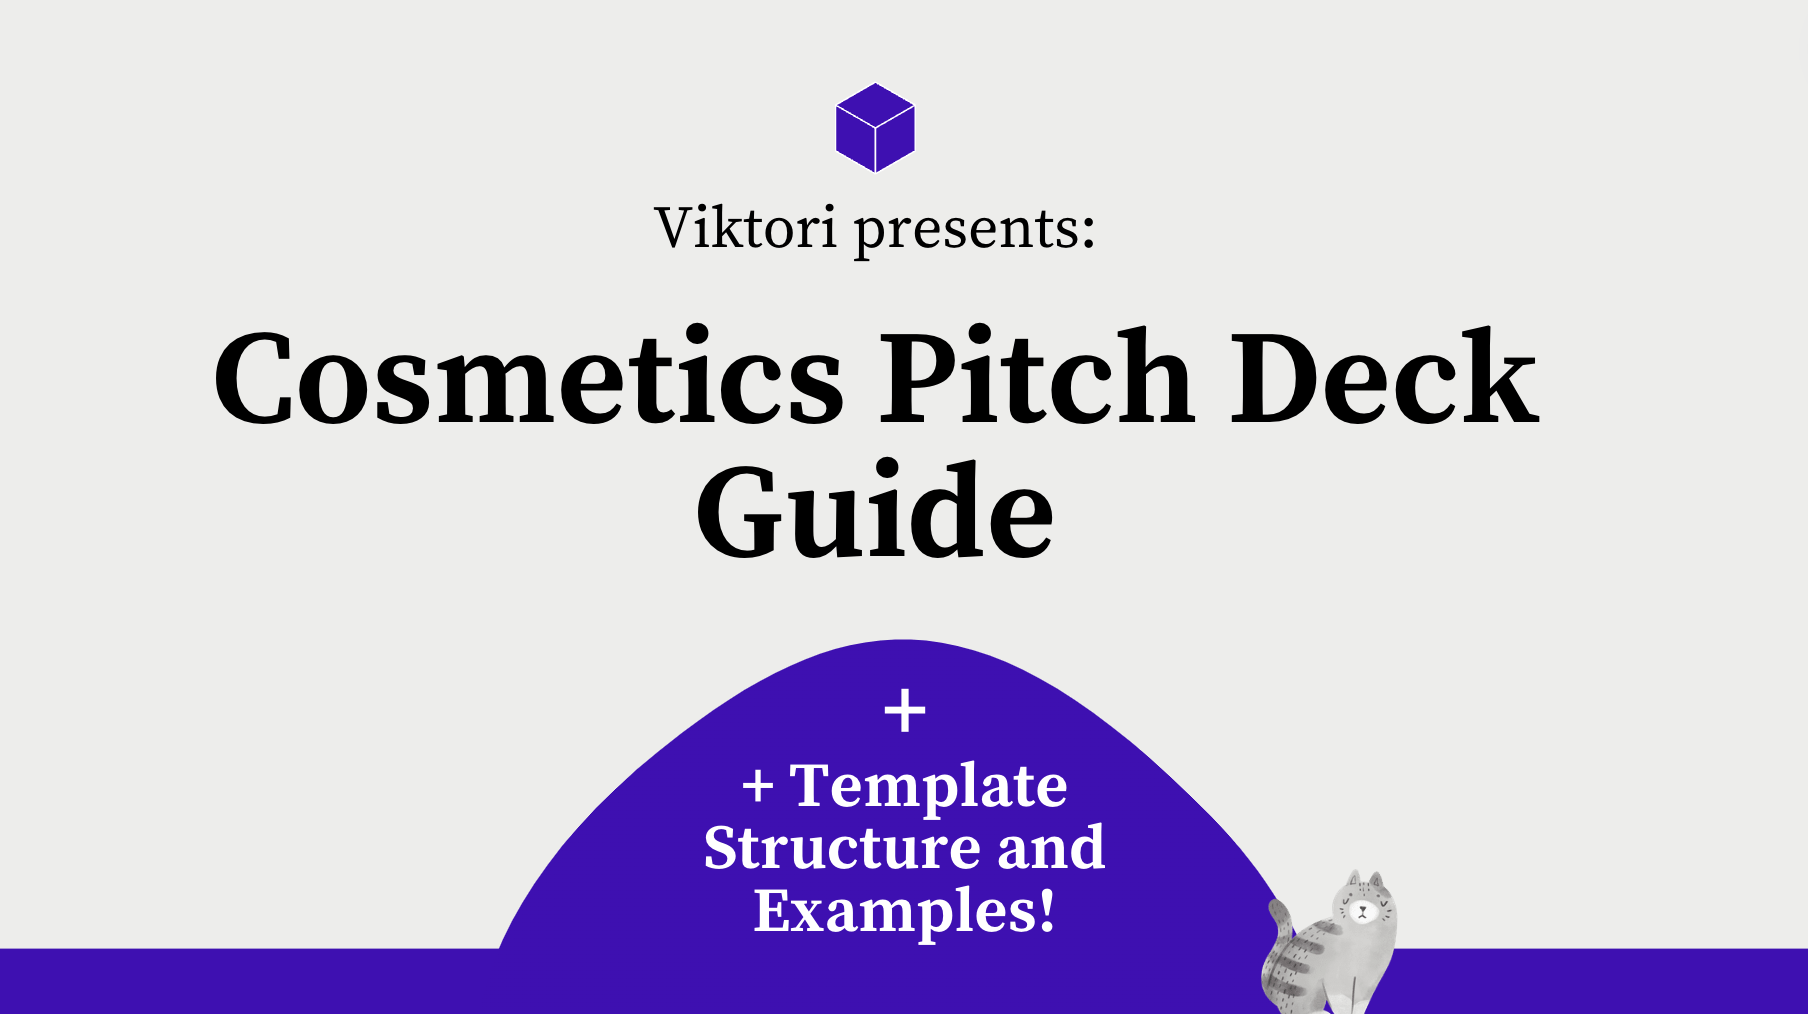 Cosmetics Pitch Deck Guide